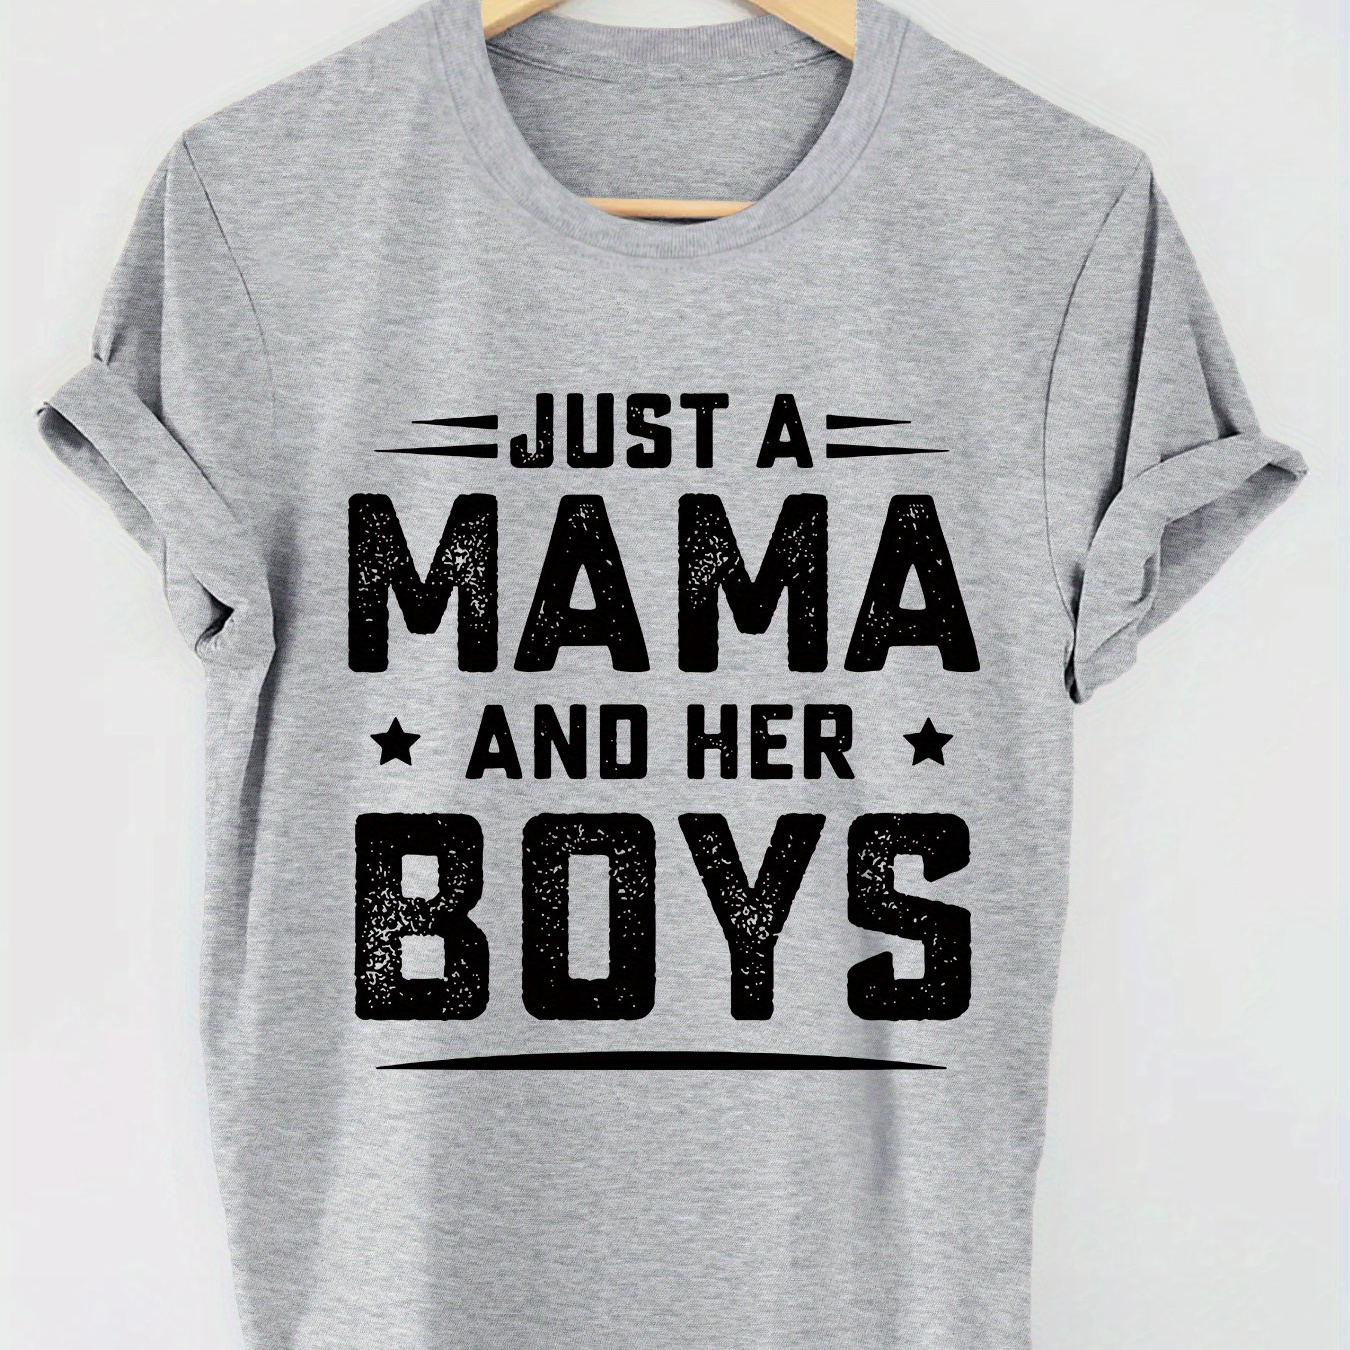 

Mama And Her Boys Letter Print T-shirt, Short Sleeve Crew Neck Casual Top For Summer & Spring, Women's Clothing